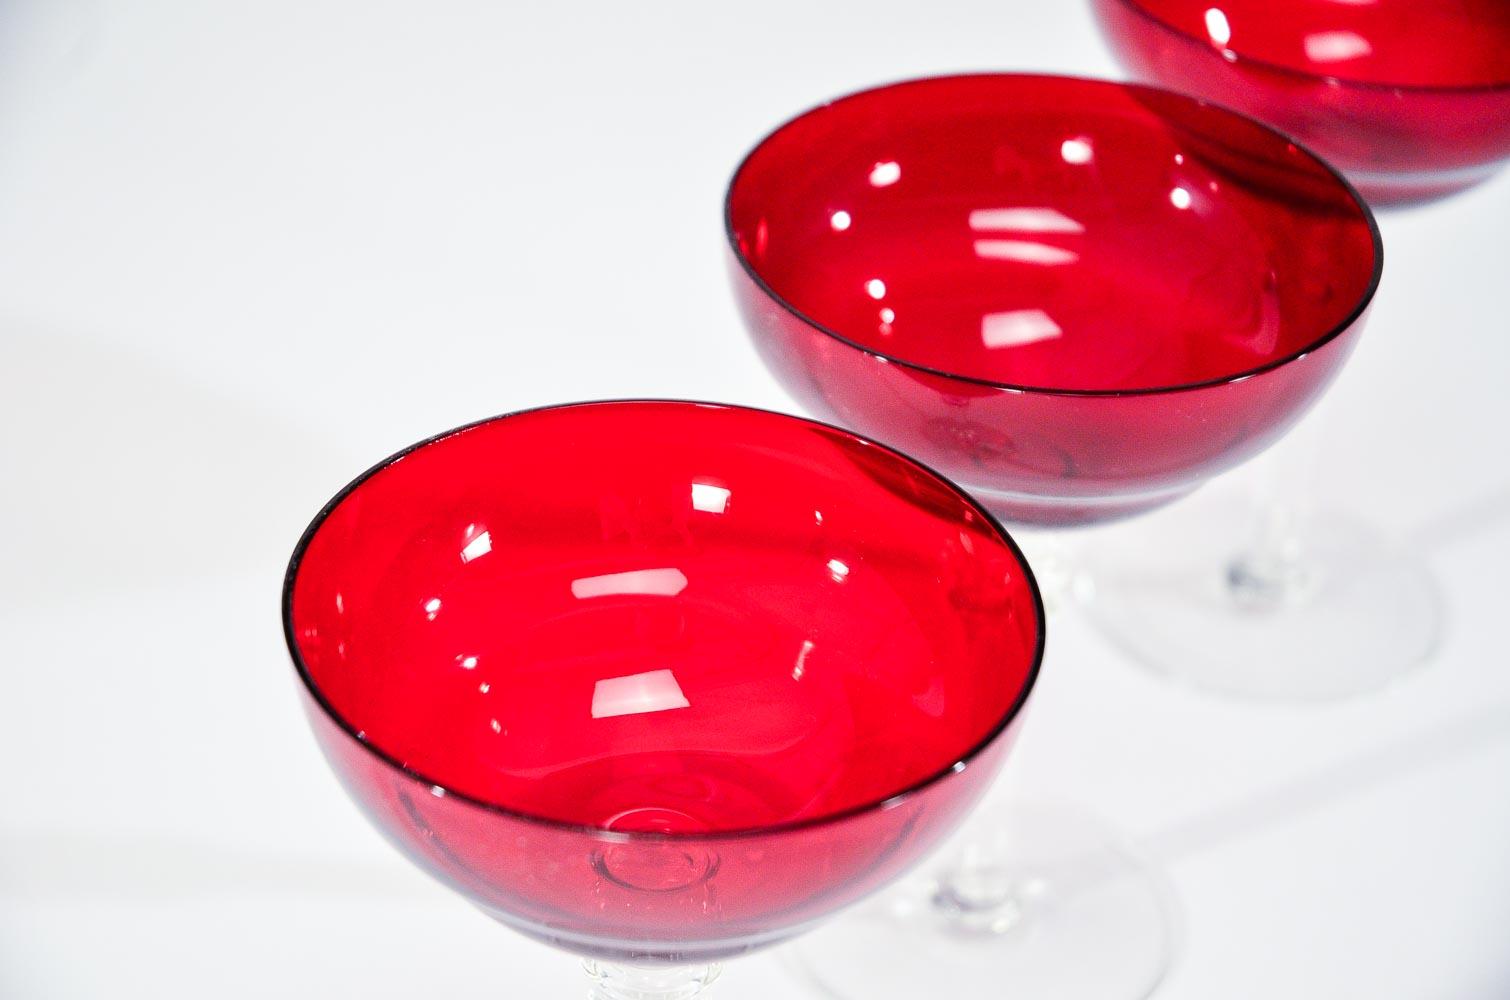 This set of 12 martini/champagne goblets are the perfect size and shape for your favorite cocktail served in a vibrant ruby red glass. The molded clear stem and unusual shape is evocative of the Art Deco period and is a pleasure to hold.
Make today